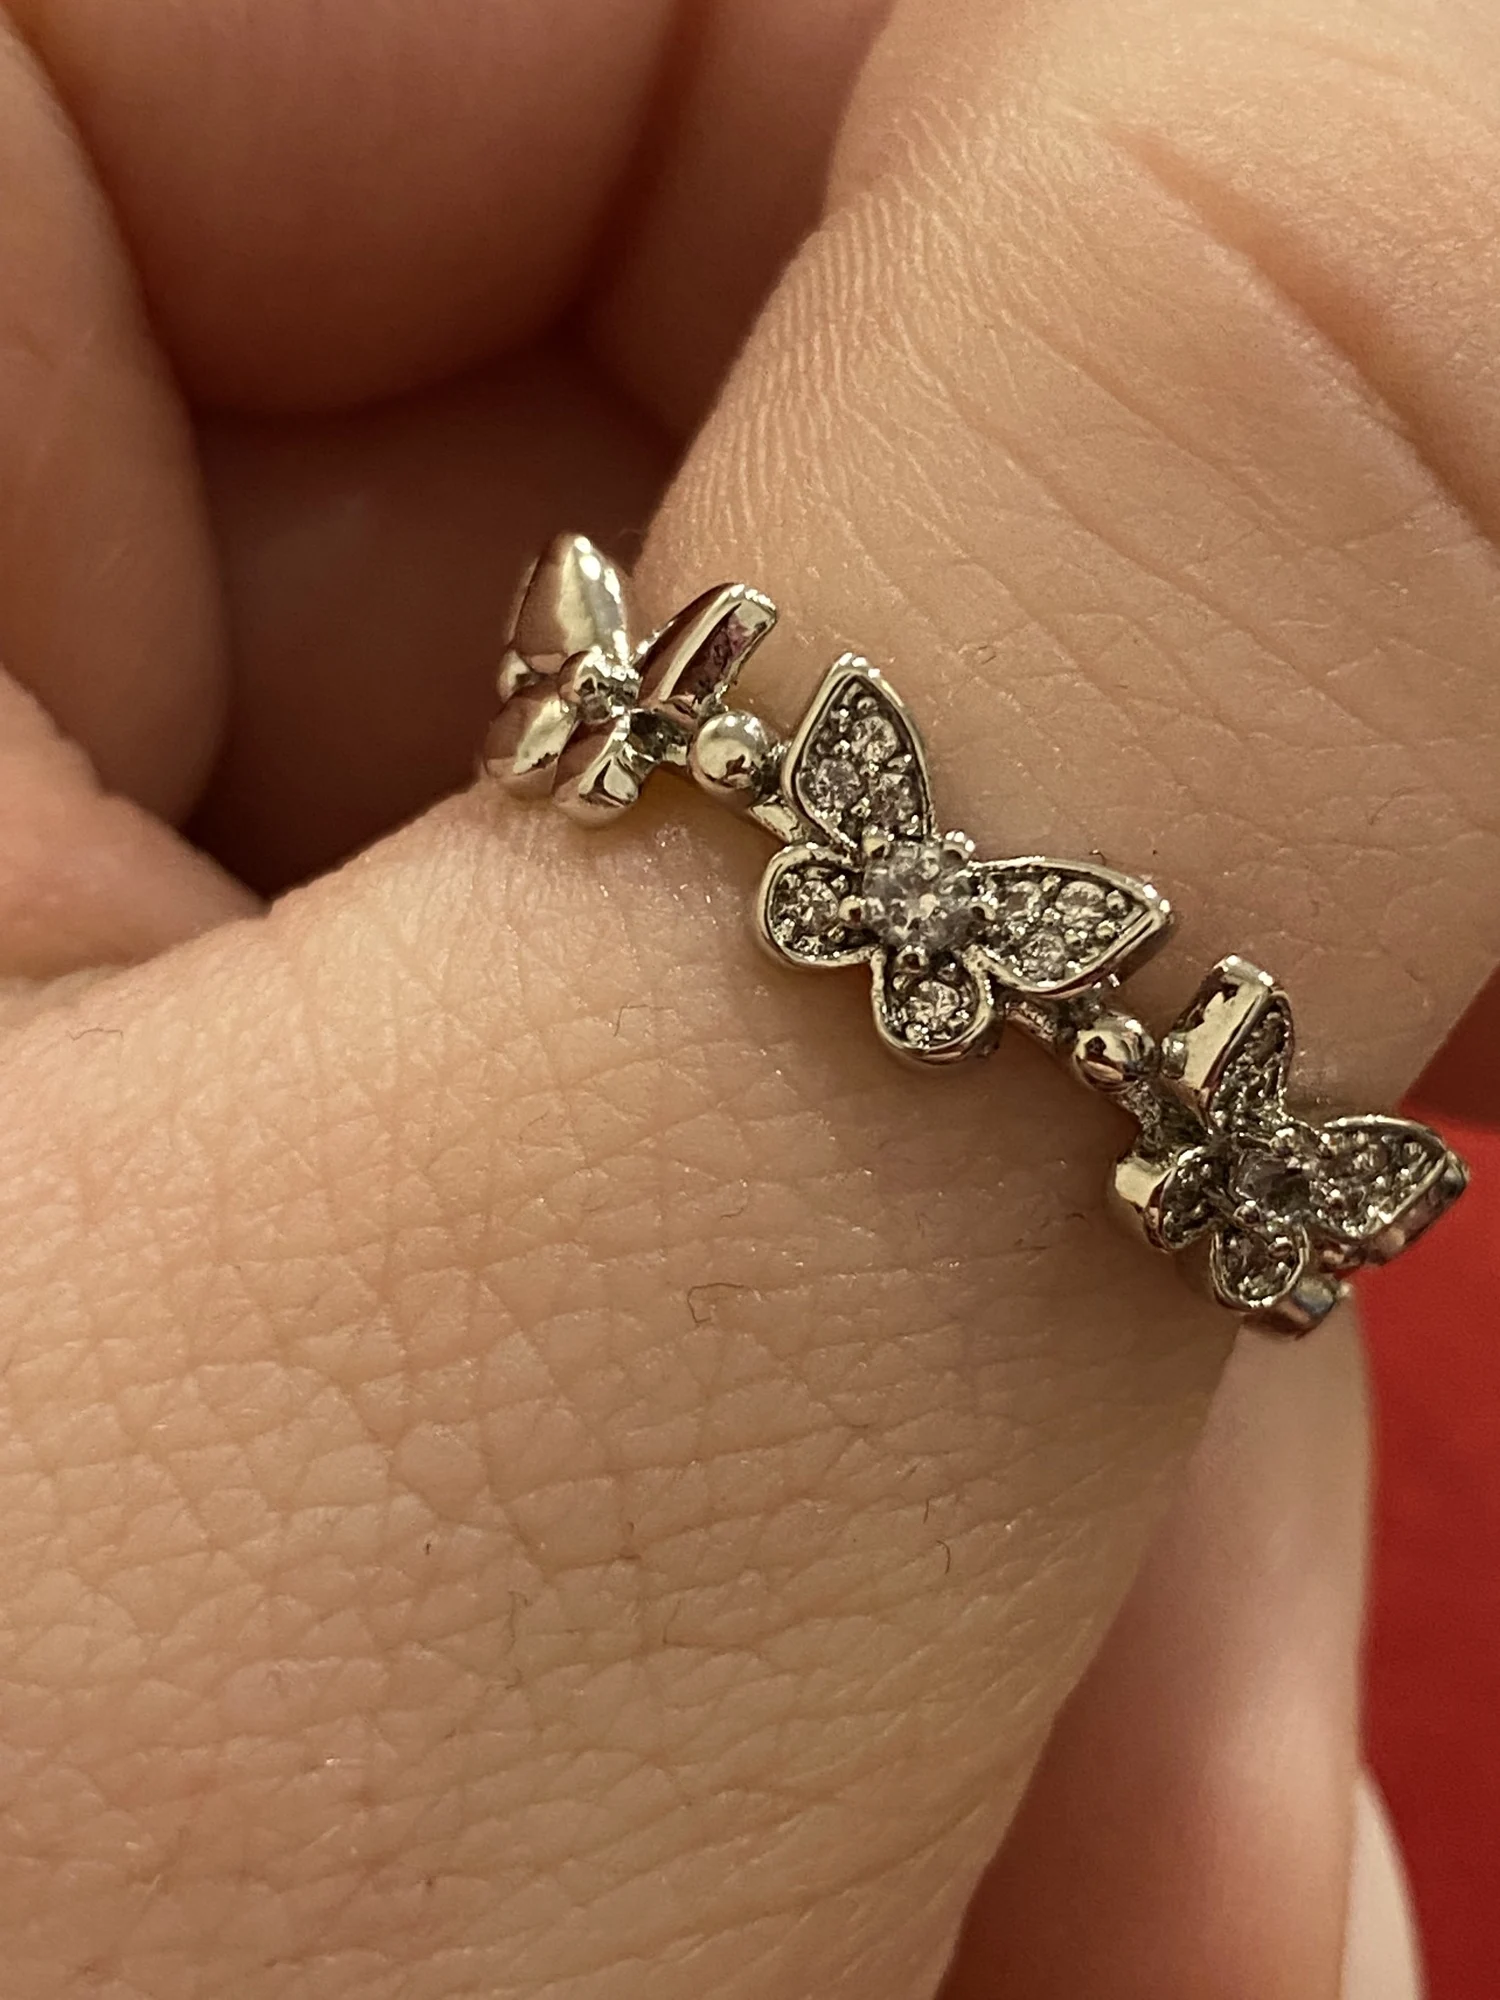 New Fashion Butterfly Rings Shiny Cubic Zirconia Leaves Geometric Adjustable Finger Ring Girls Minimalist Dainty Jewlery Gifts photo review